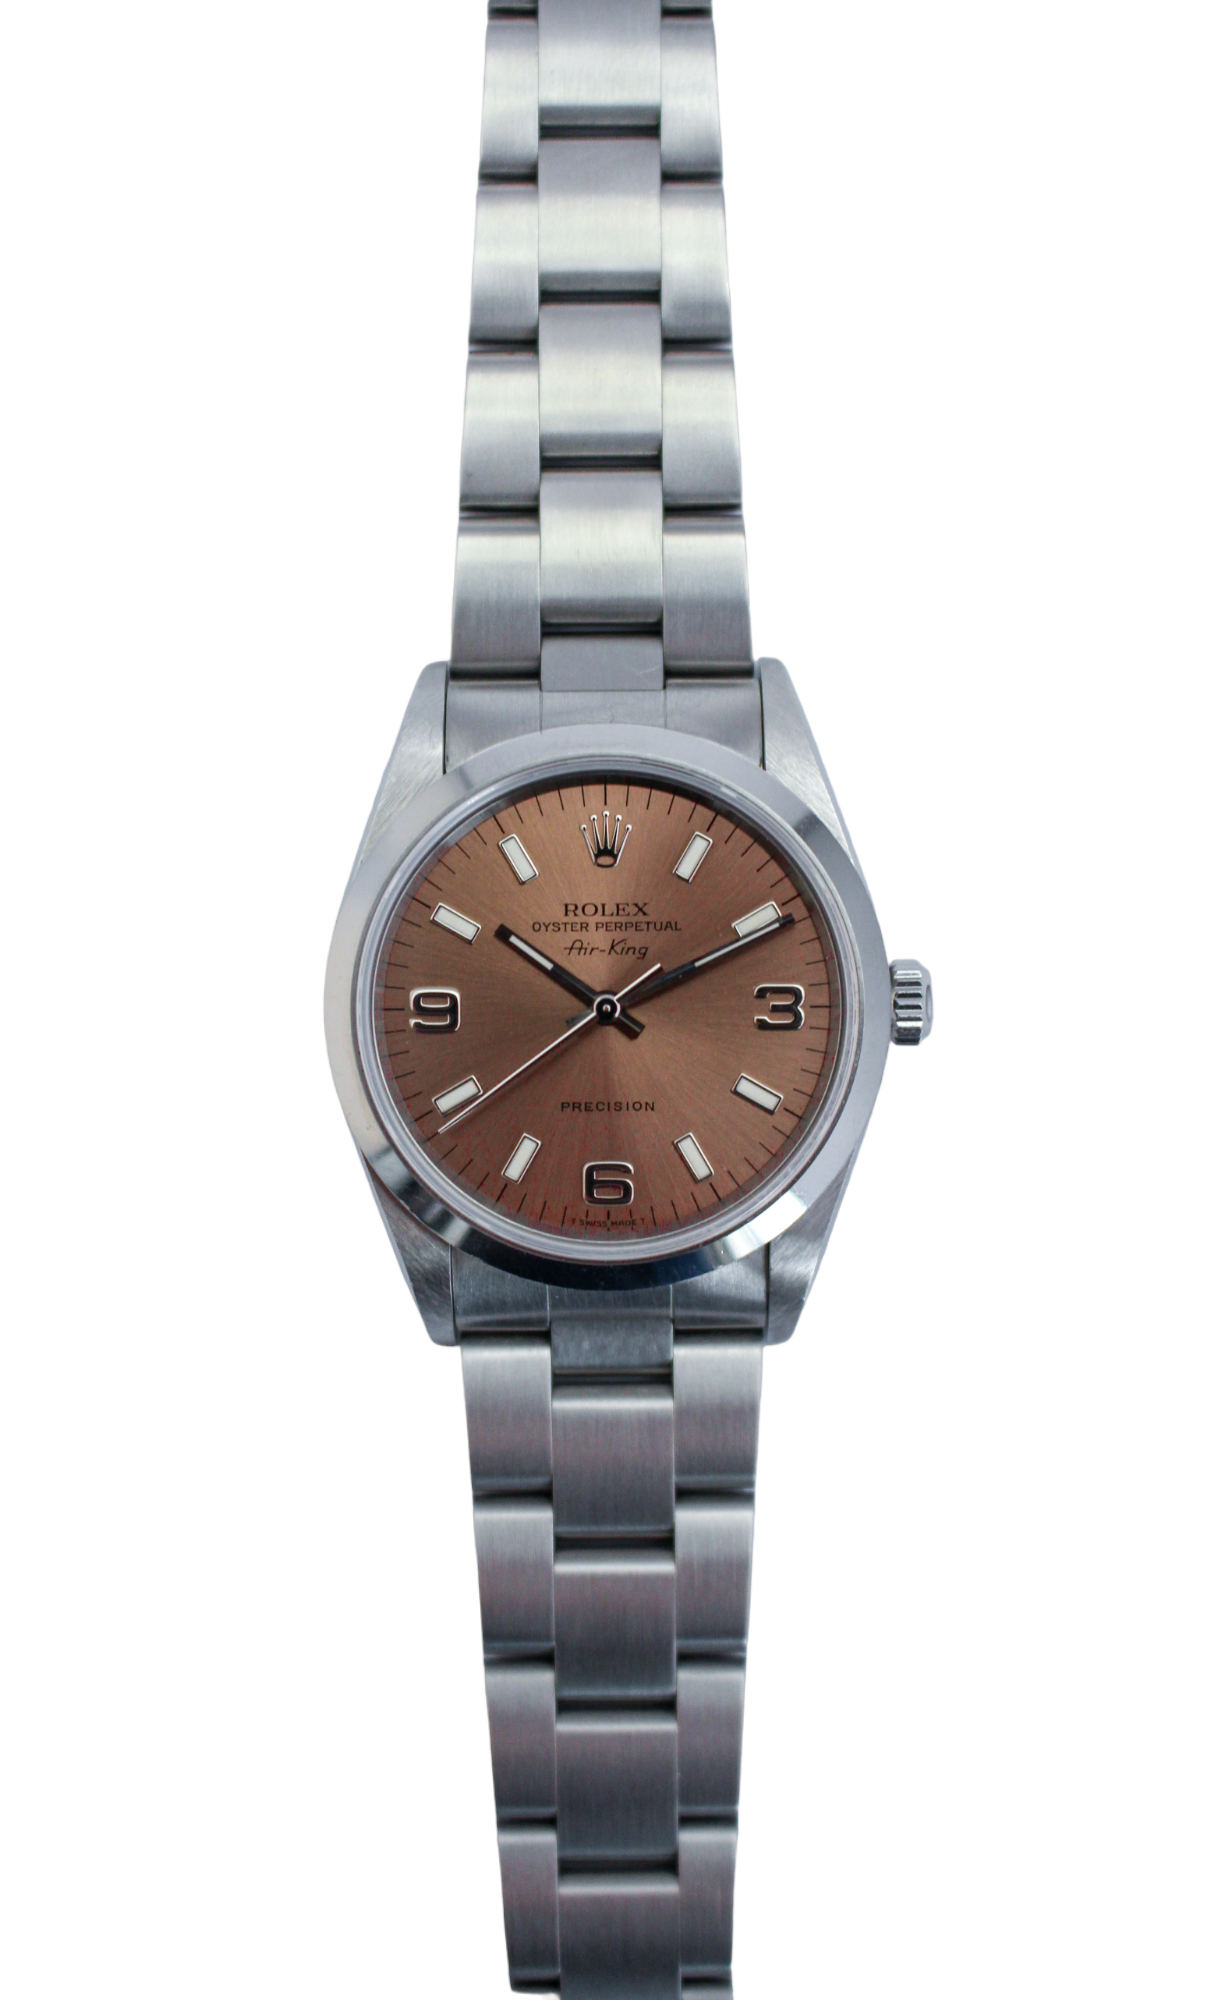 Rolex Airking 34mm with a Salmon colored dial